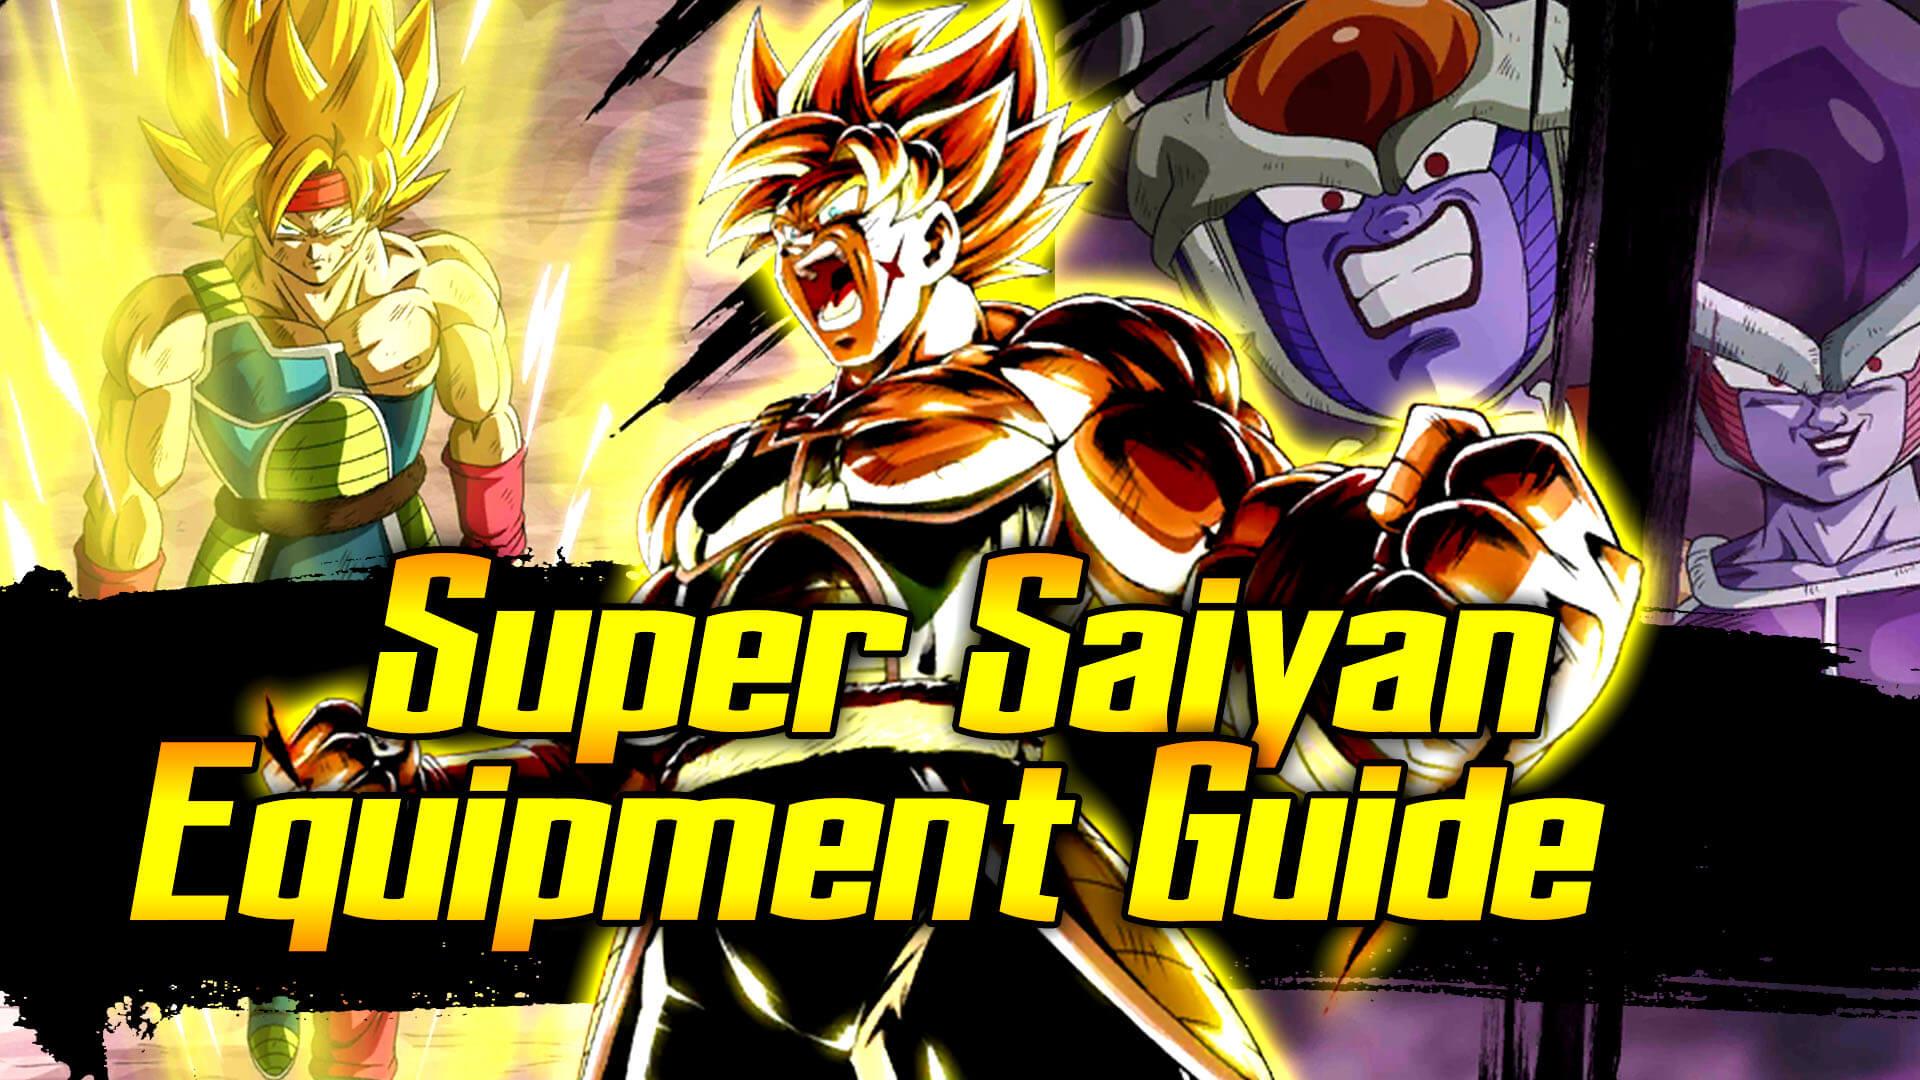 Dragon Ball Legends guide: tips and tricks for Saiyan success